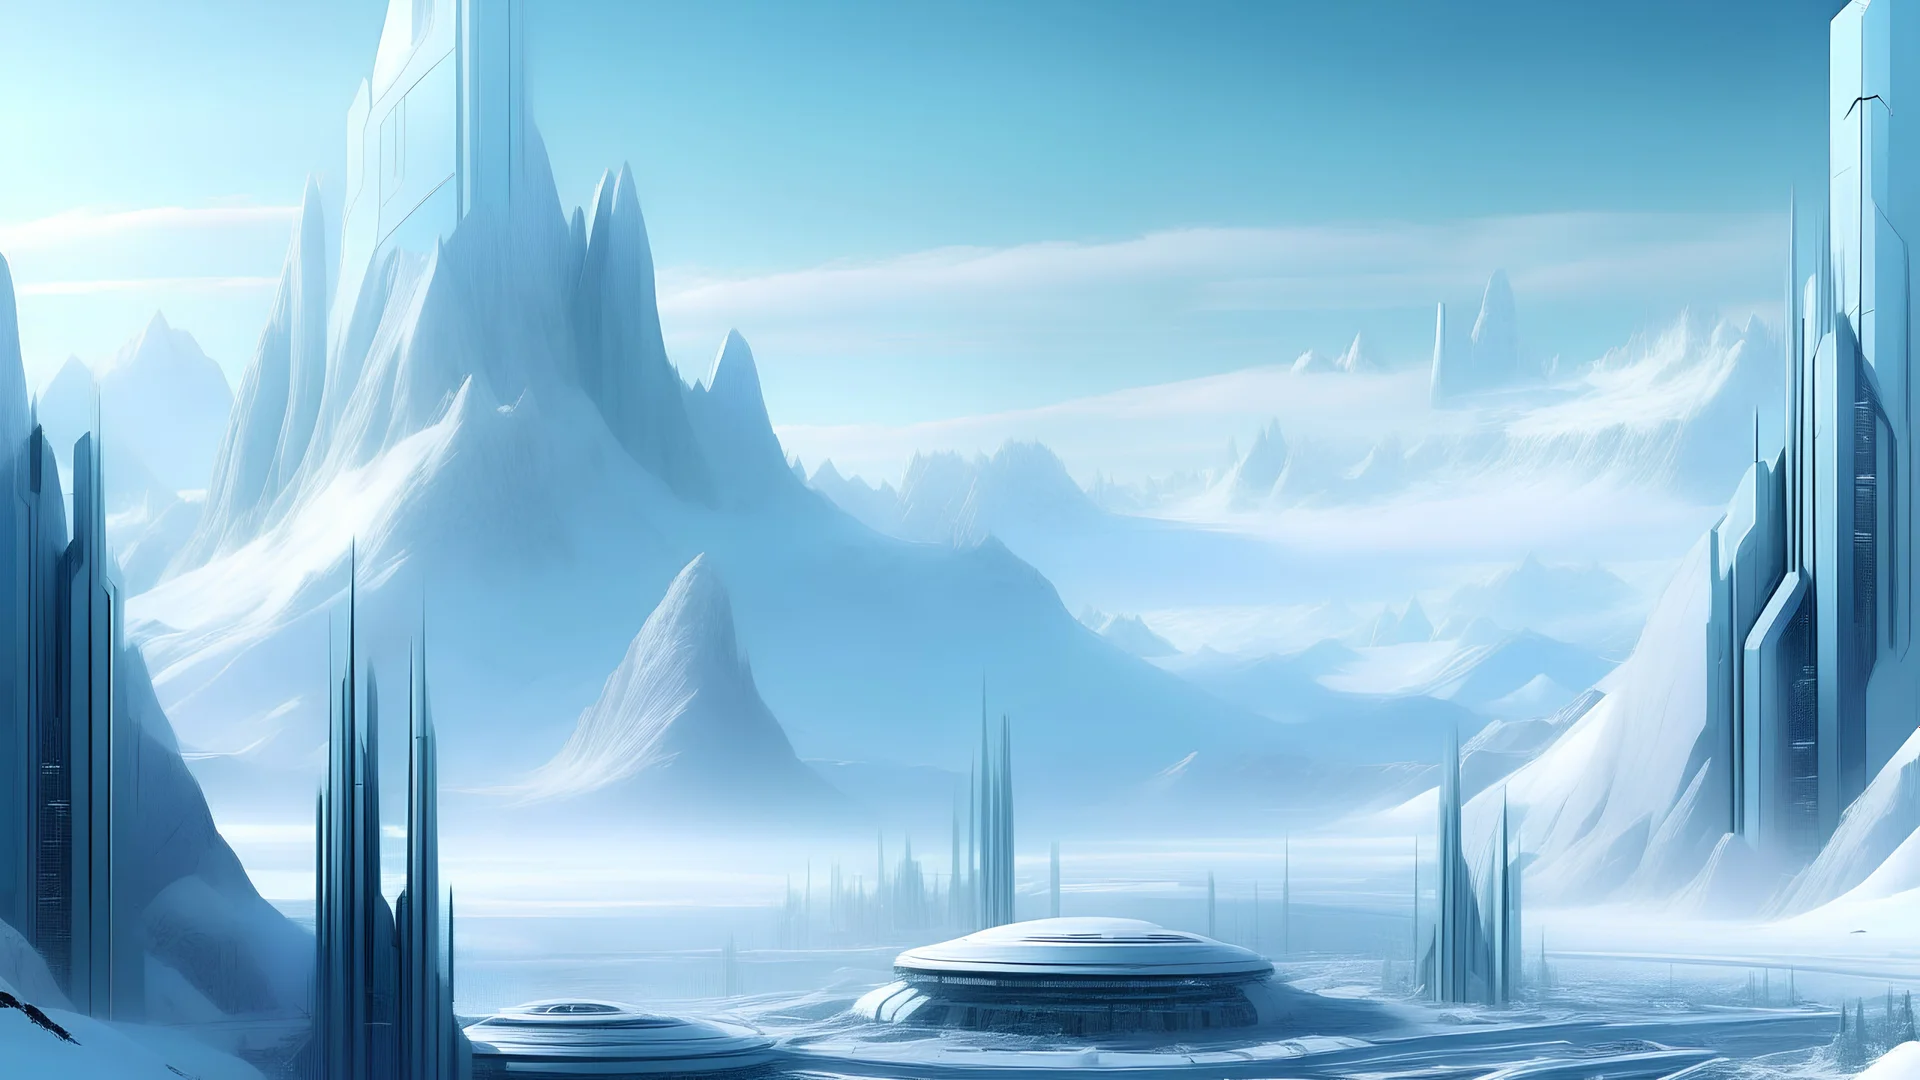 Futuristic city landscape with ice mountains behind